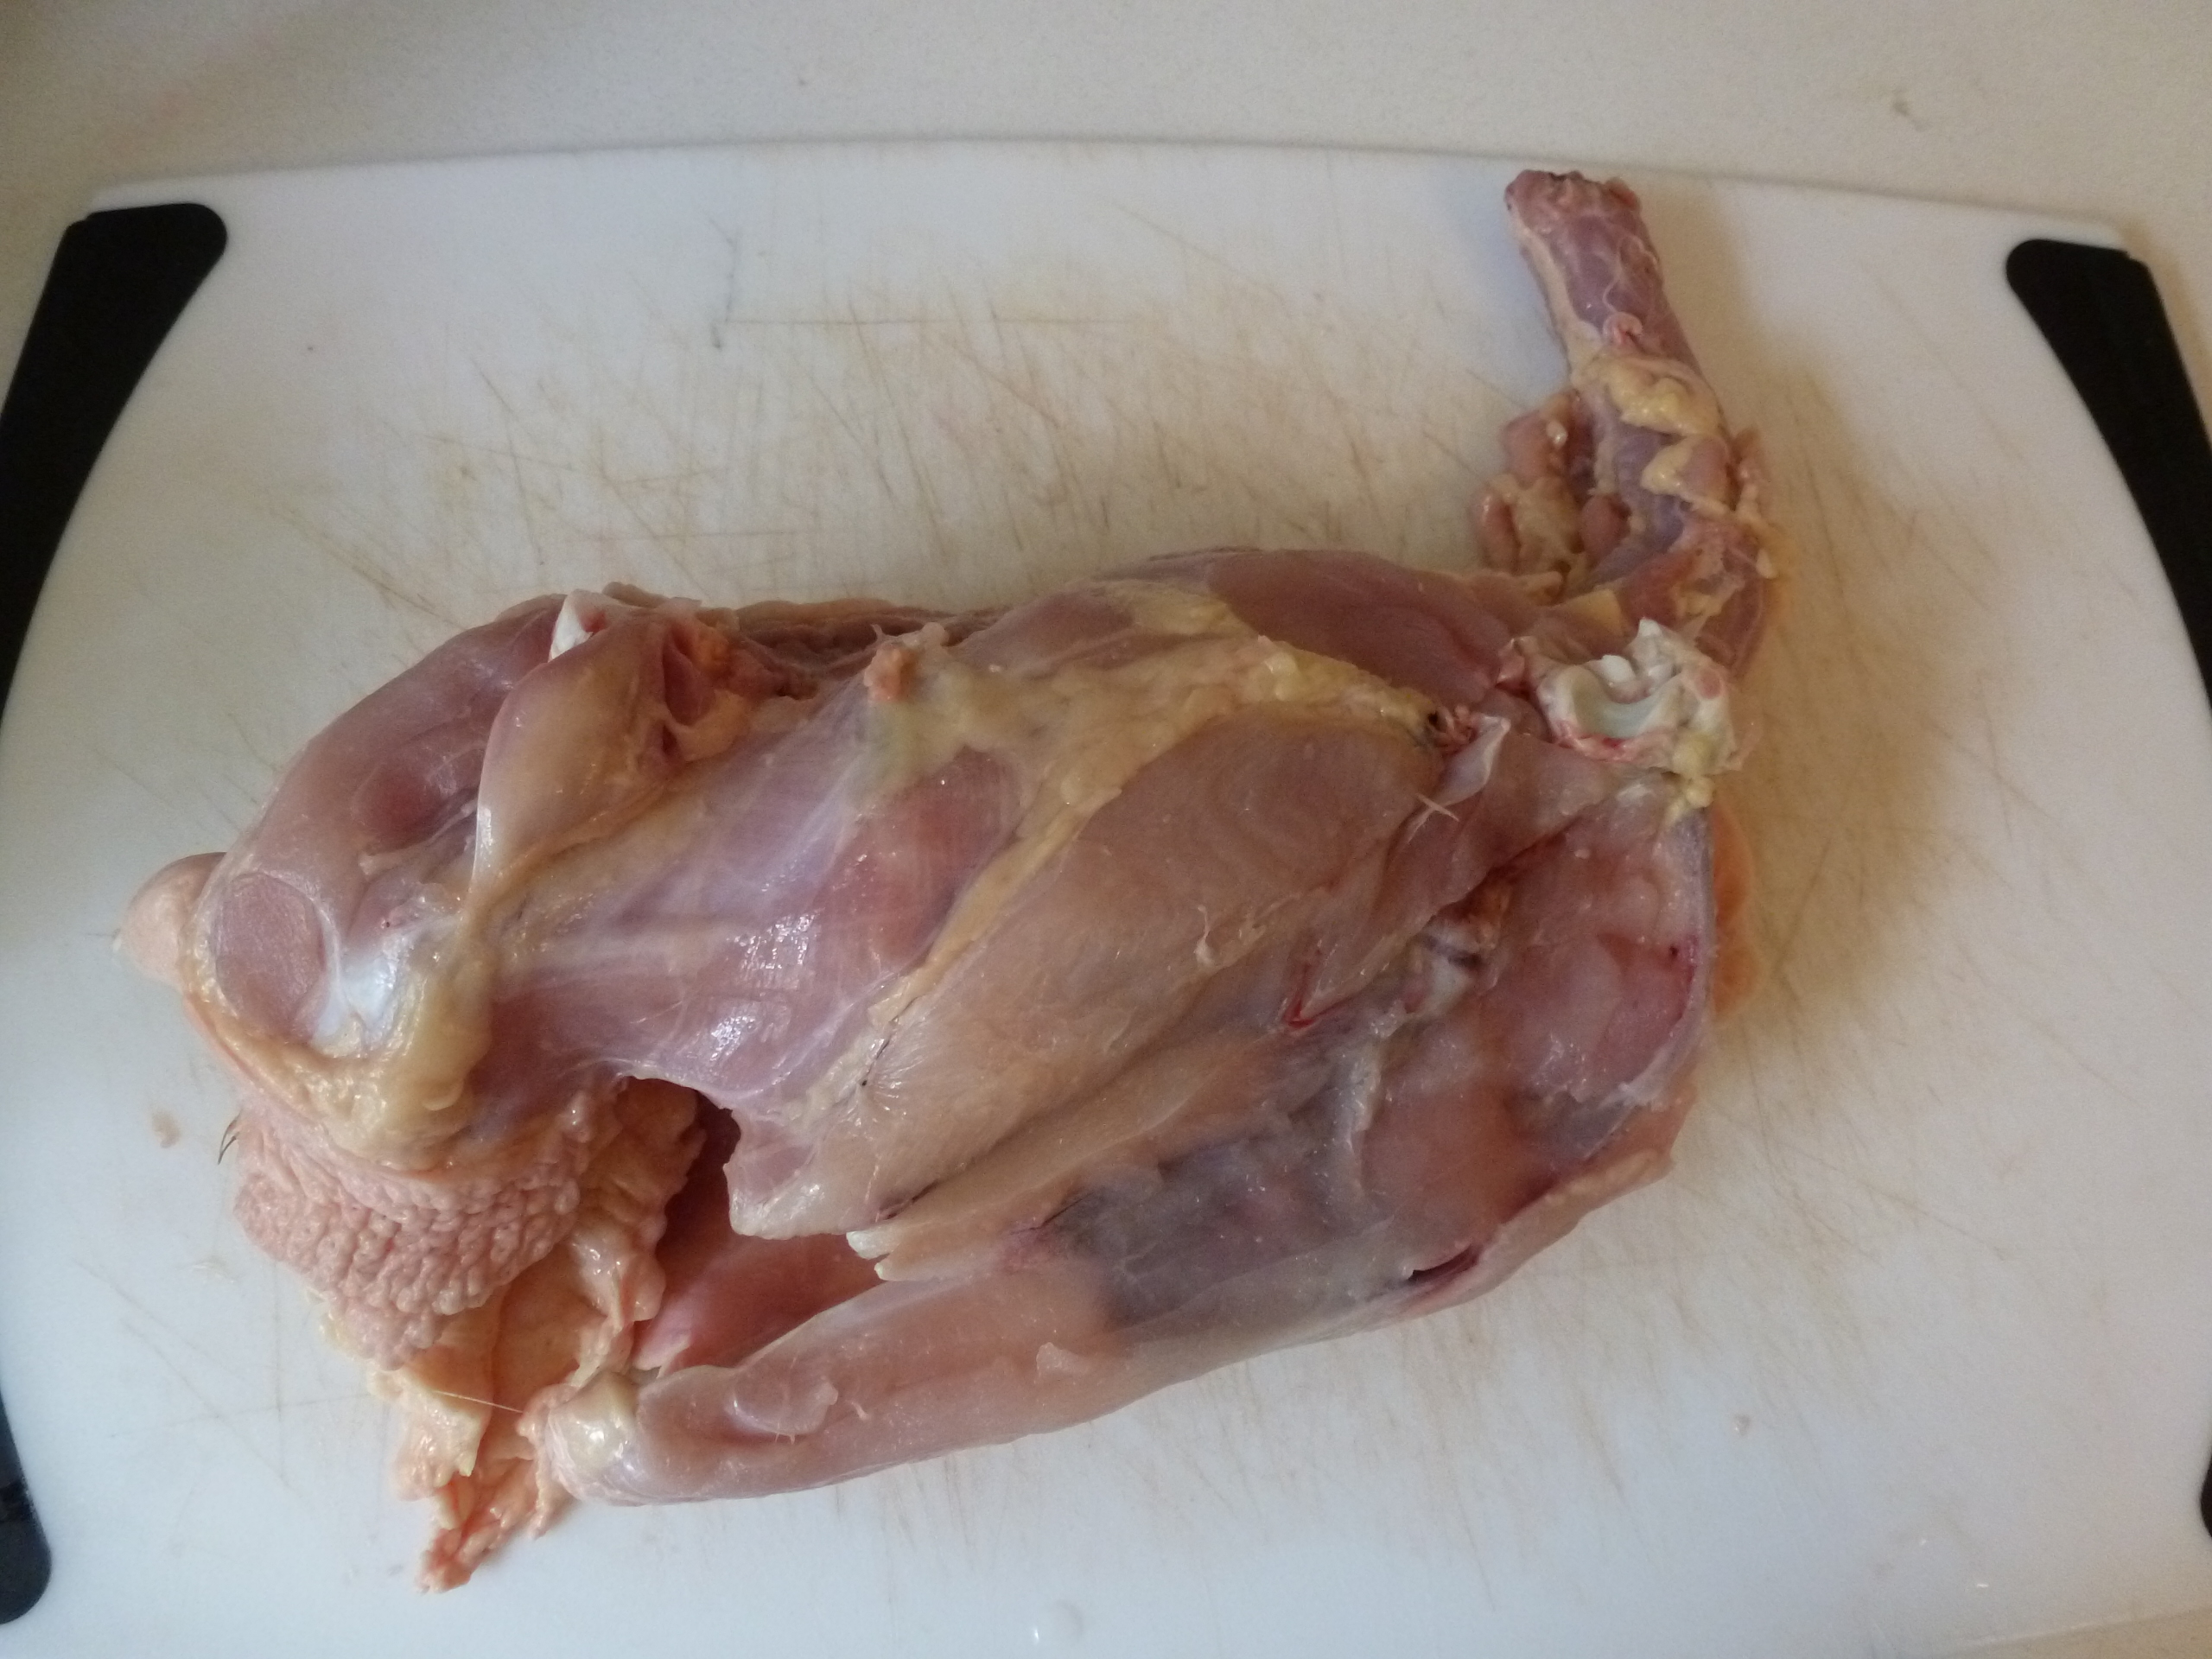 The chicken carcass, legs, breasts, and wings removed